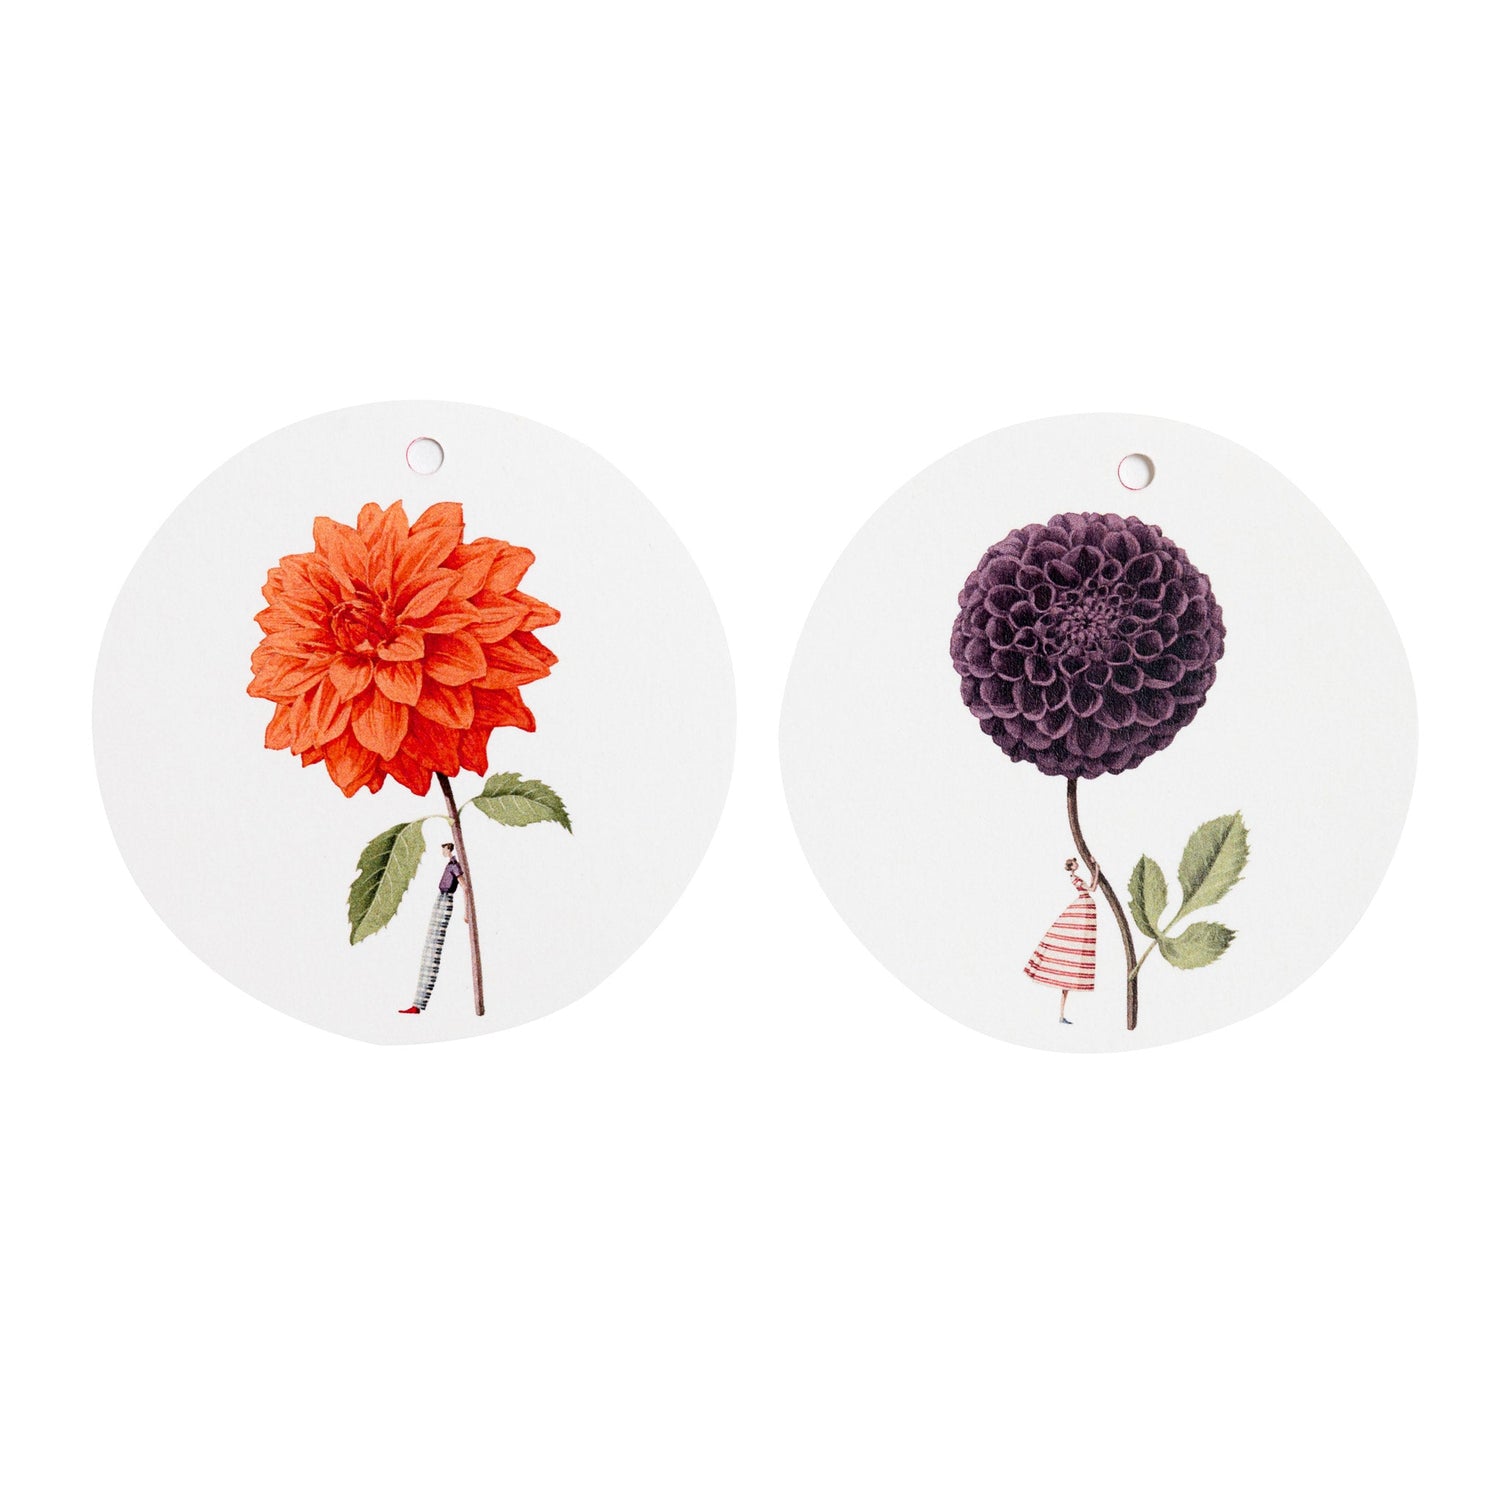 gift tags, tags, dahlias, flowers, made in england, illustration